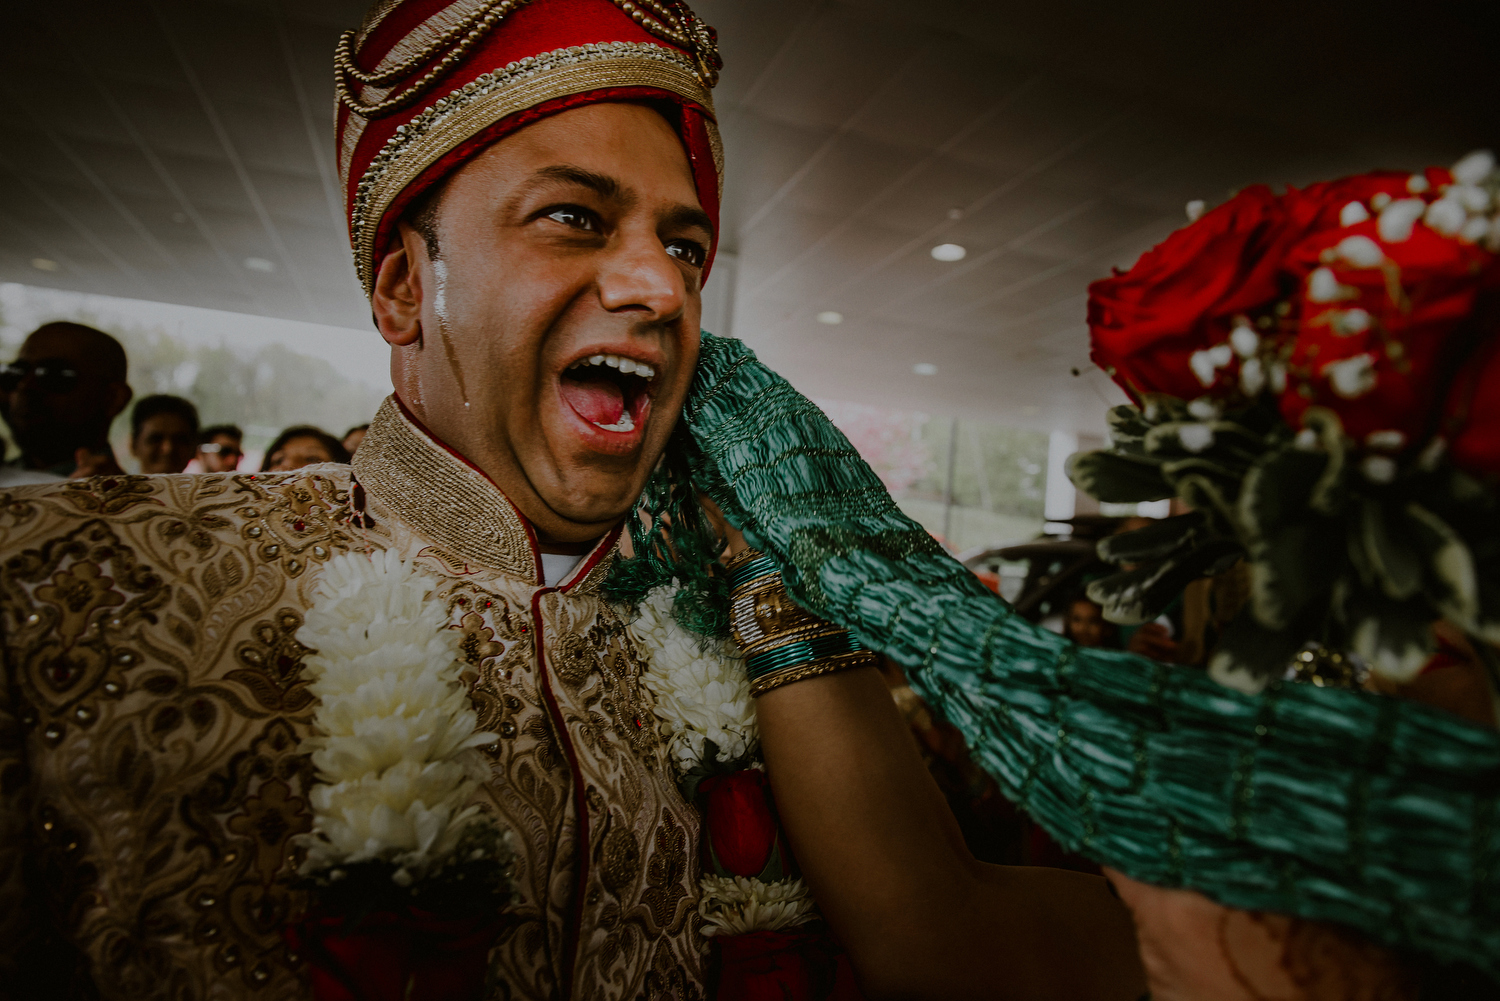 groom sweating as he enters indian wedding ceremony after baraat